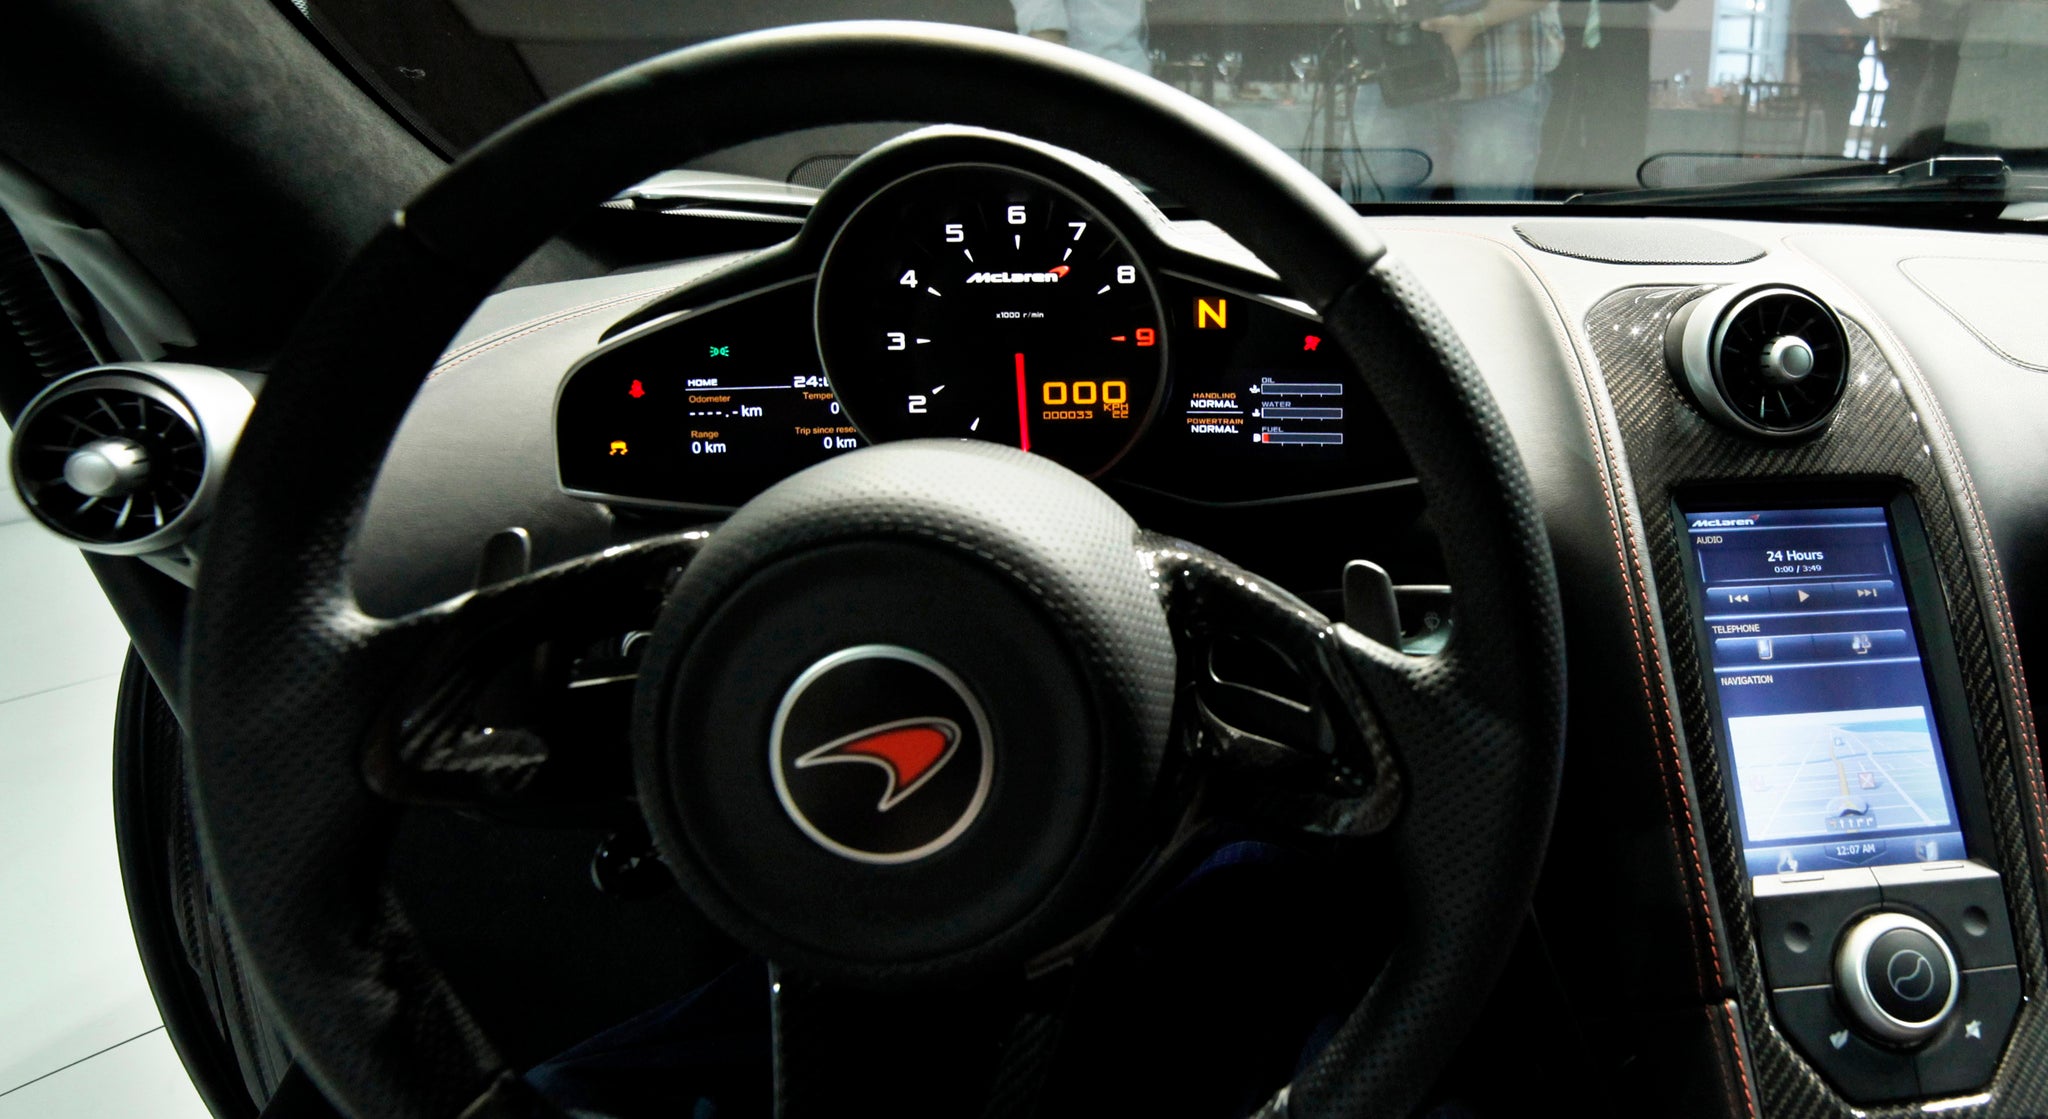  view of the interior of the McLaren MP4-12C high-performance sports car in New York September 16, 2010.  REUTERS/Eduardo Munoz 